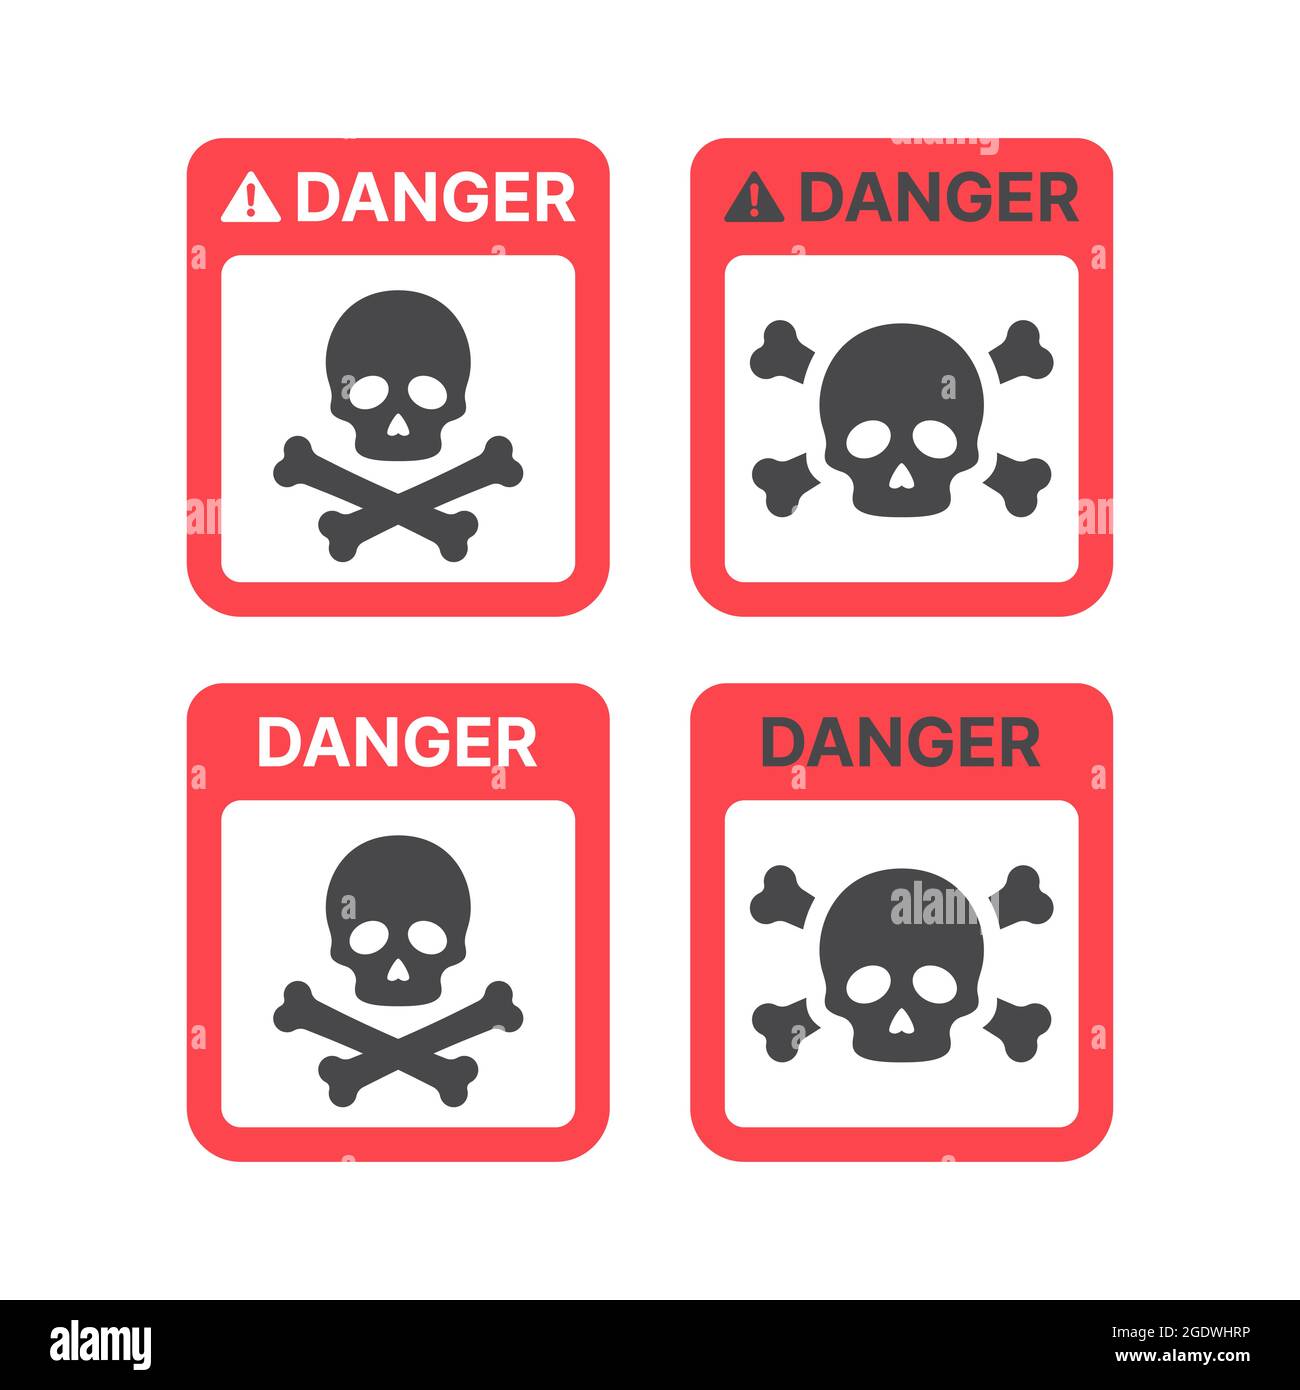 Danger warning sign with skull and crossbones. Poison, toxic or biohazard icon. Stock Vector